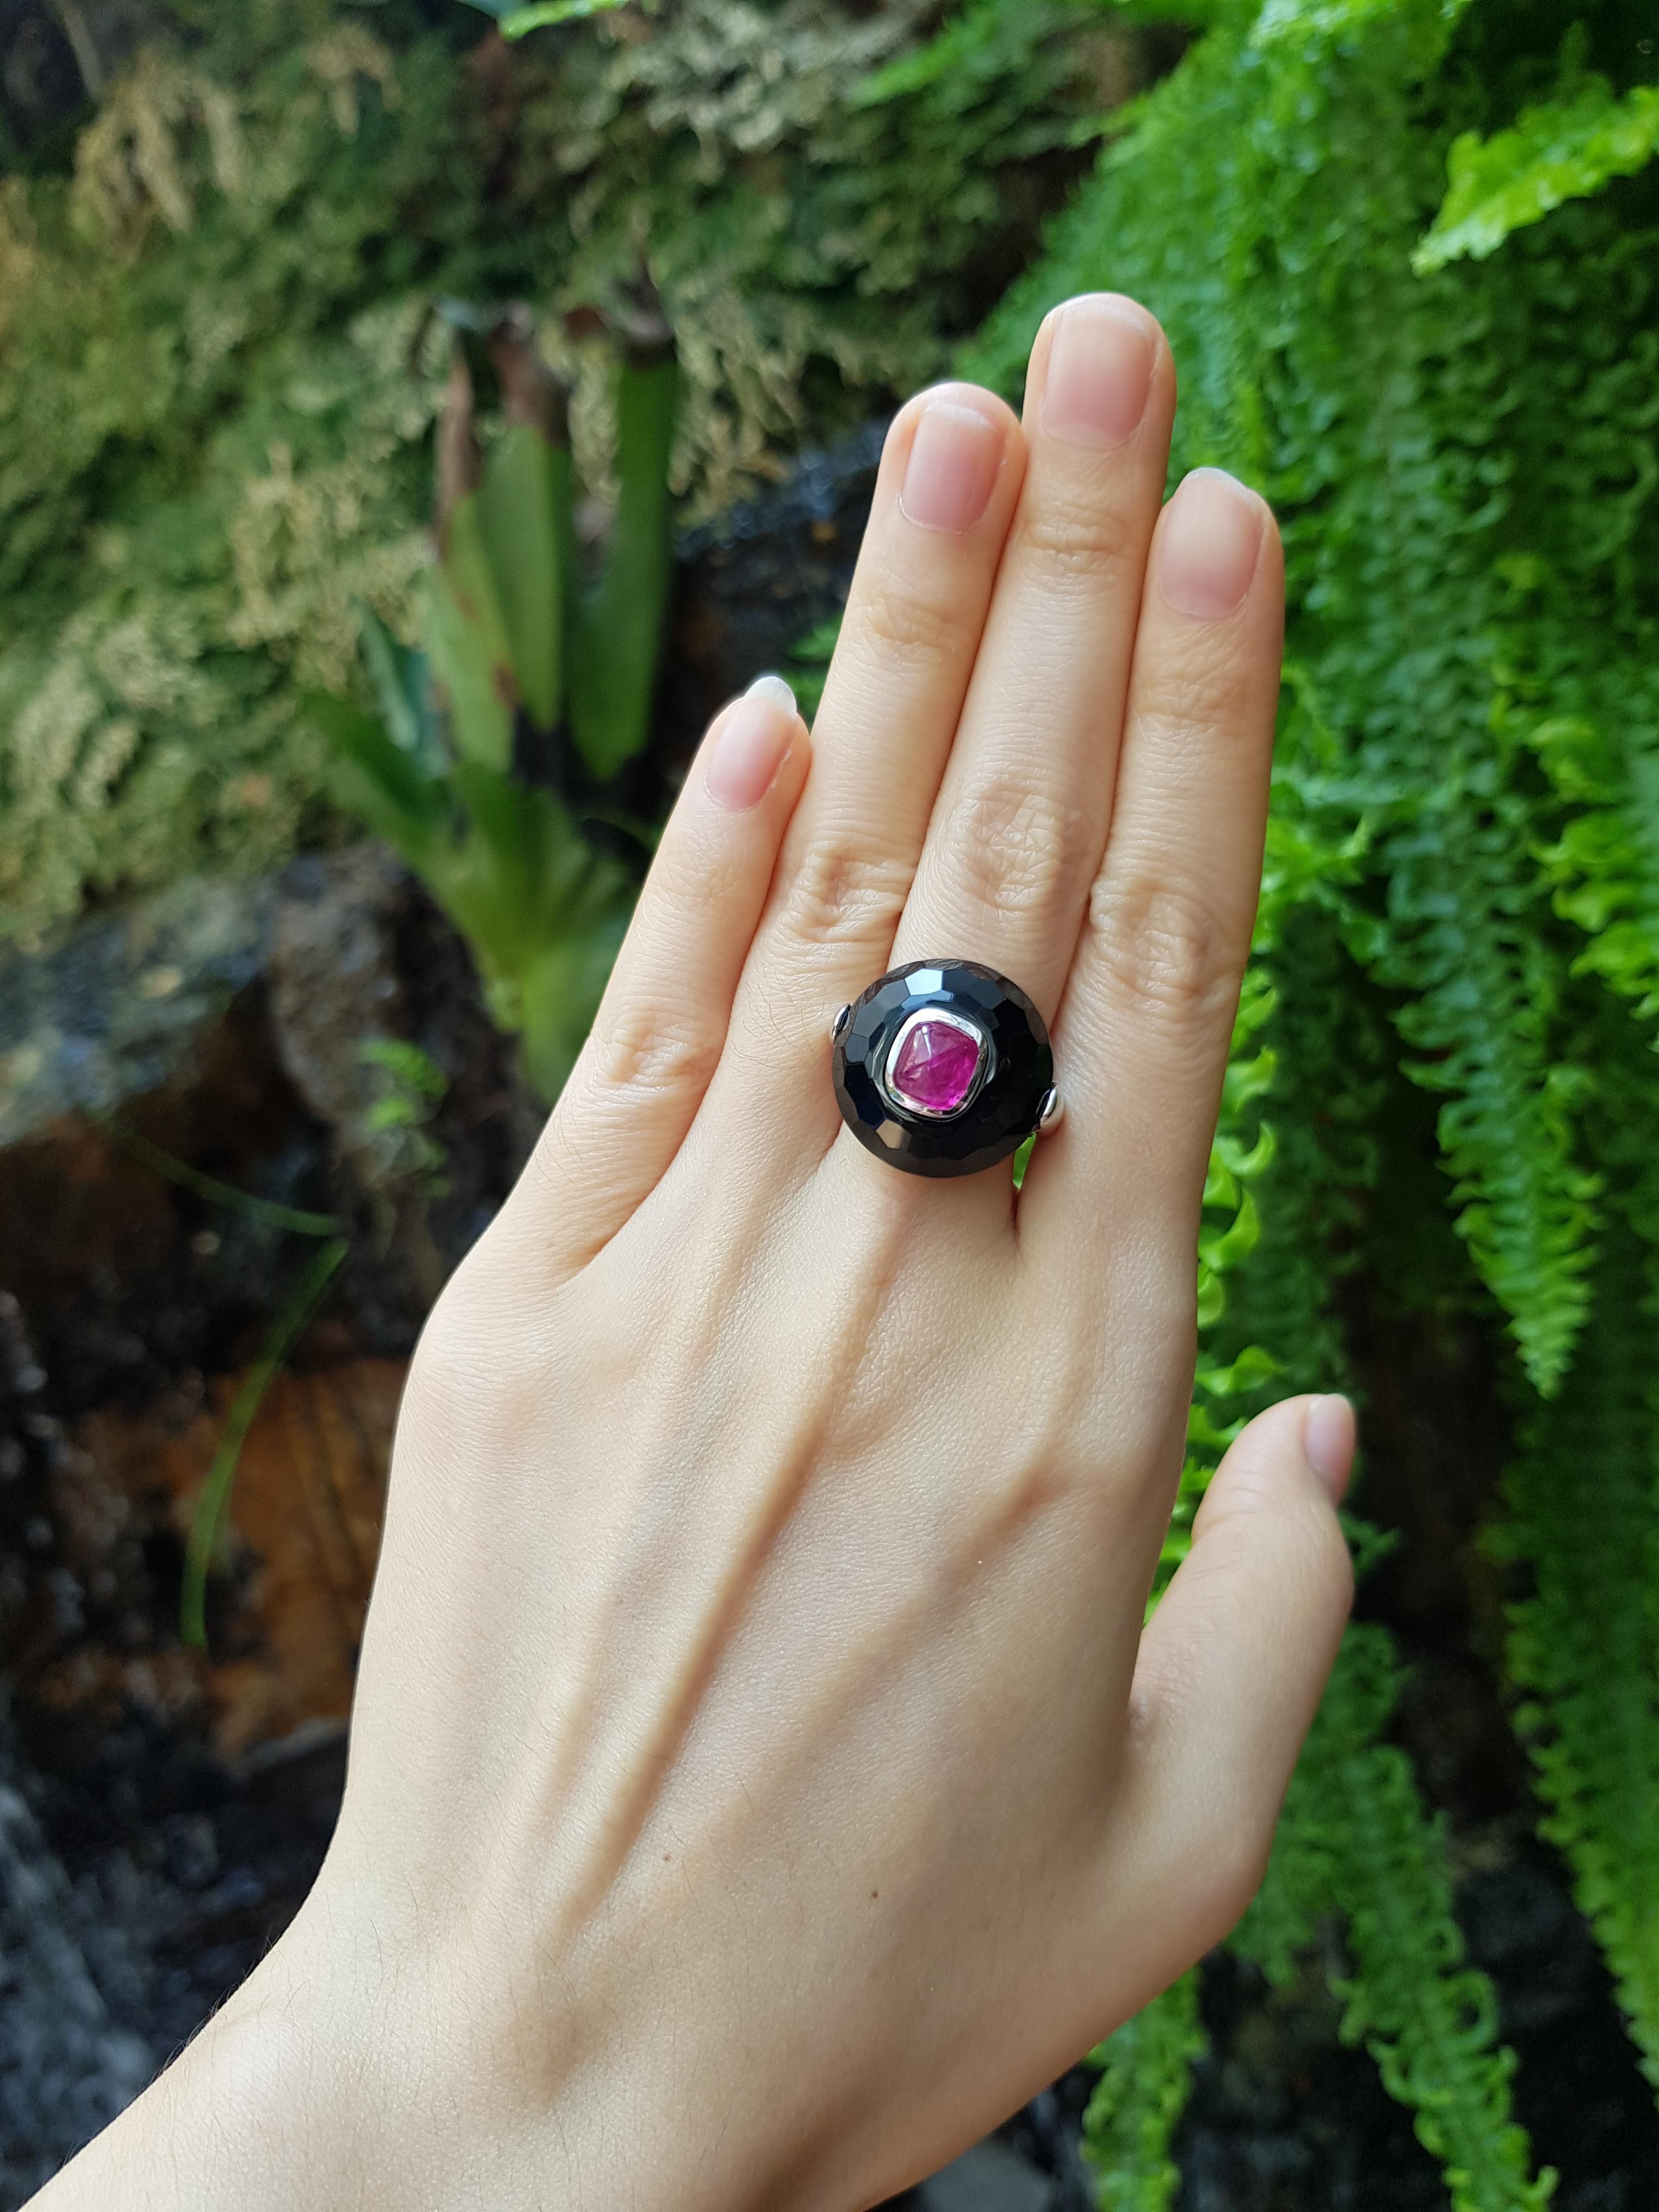 Cabochon Ruby 2.90 carats with Onyx 3.65 carats Ring set in 18 Karat White Gold Settings

Width: 2.2 cm
Length: 2.0 cm 
Ring Size: 53

